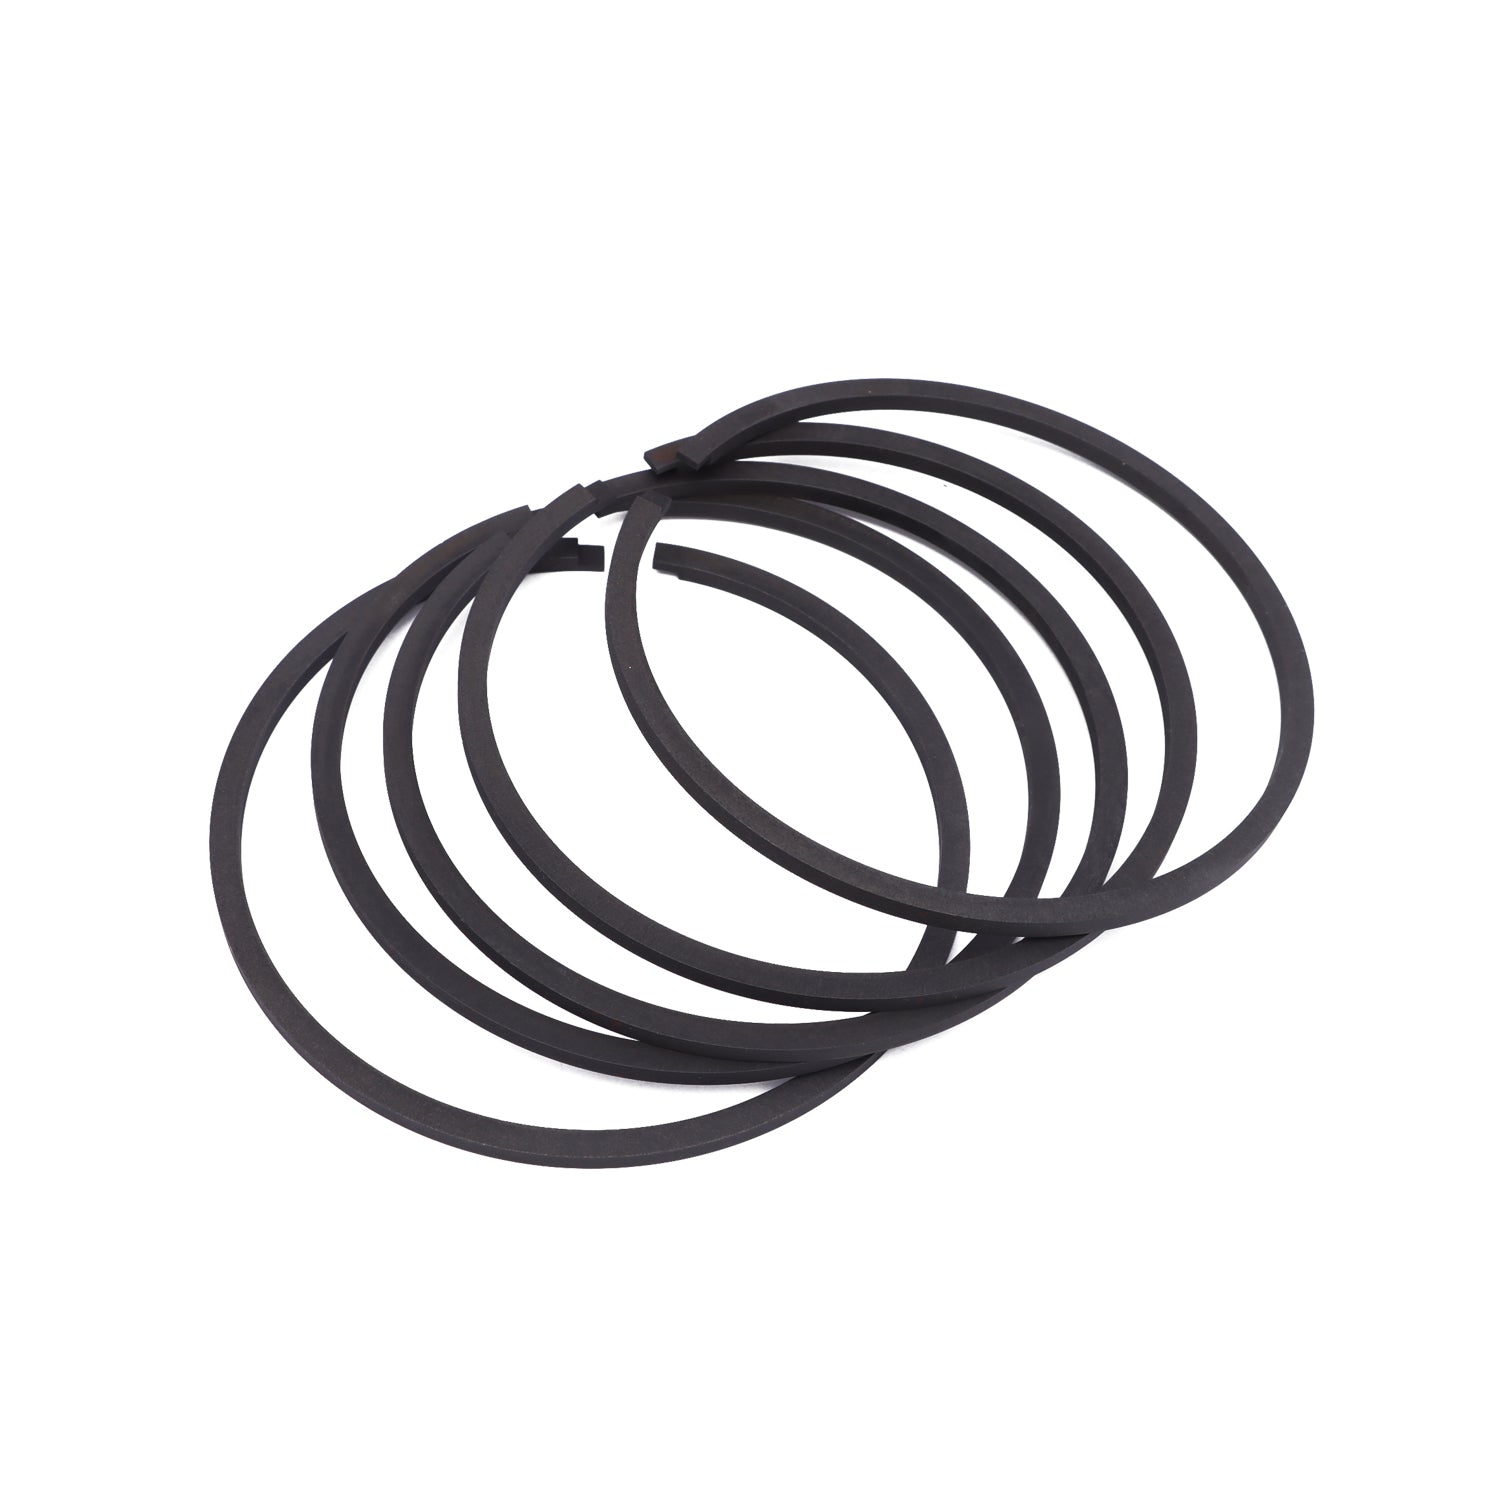 Differential Cylinder 10164038 (DN 120/85) Seal Kit for Schwing Truck-Mounted Concrete Pump, Main Hydraulic Oil Cylinder Sealing Kit for Schwing Stetter Boom Pump. - KUDUPARTS